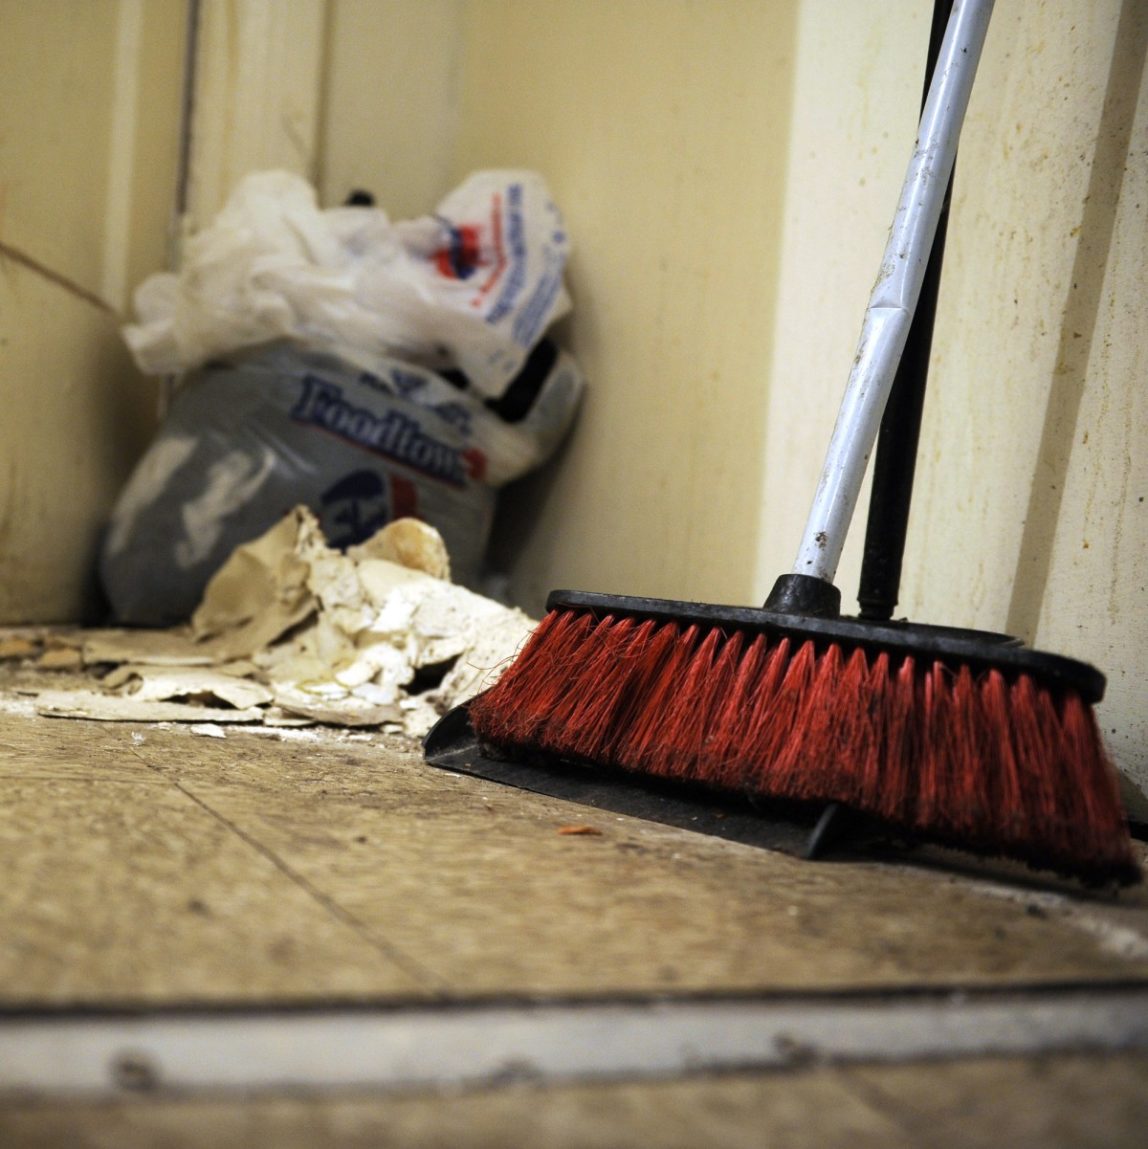 The plaster from a collapsed ceiling is seen in an apartment at 1576 Taylor Ave. Wednesday, April 21, 2010 in the Bronx borough of New York. (AP Photo/Stephen Chernin)